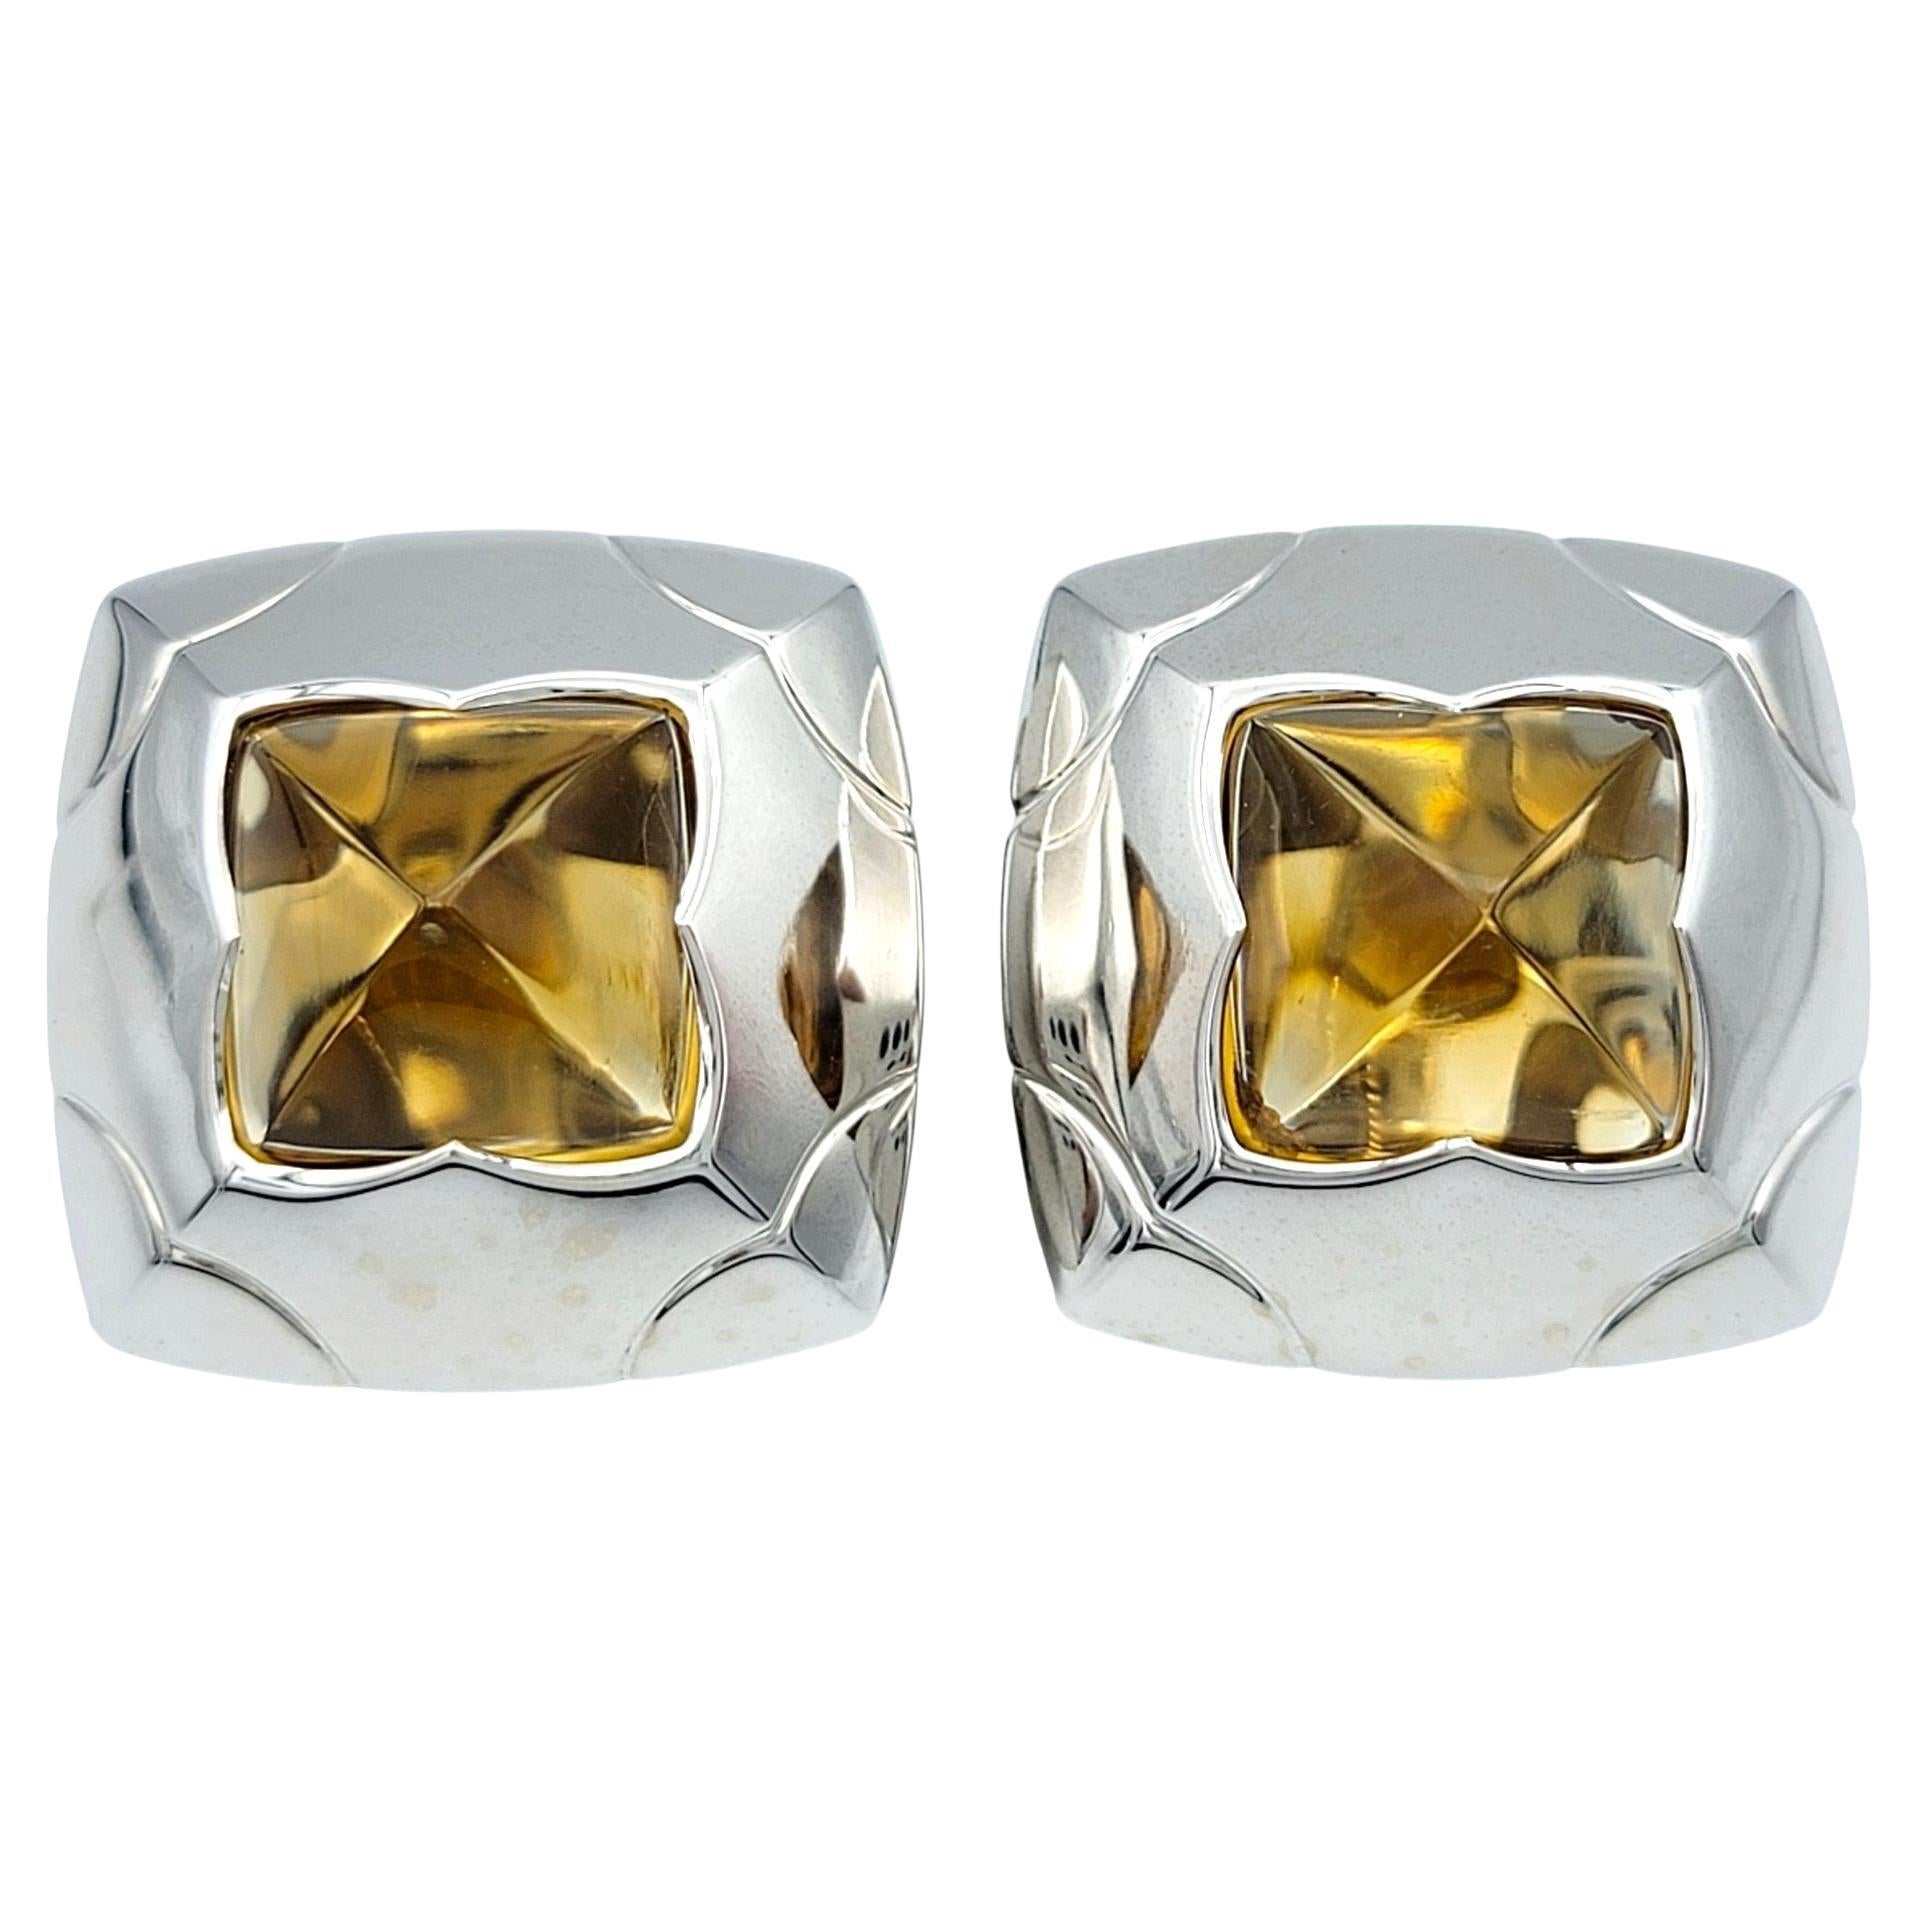 Bvlgari Pyramid Citrine Non-Pierced Stud Style Earrings in 18 Karat White Gold For Sale